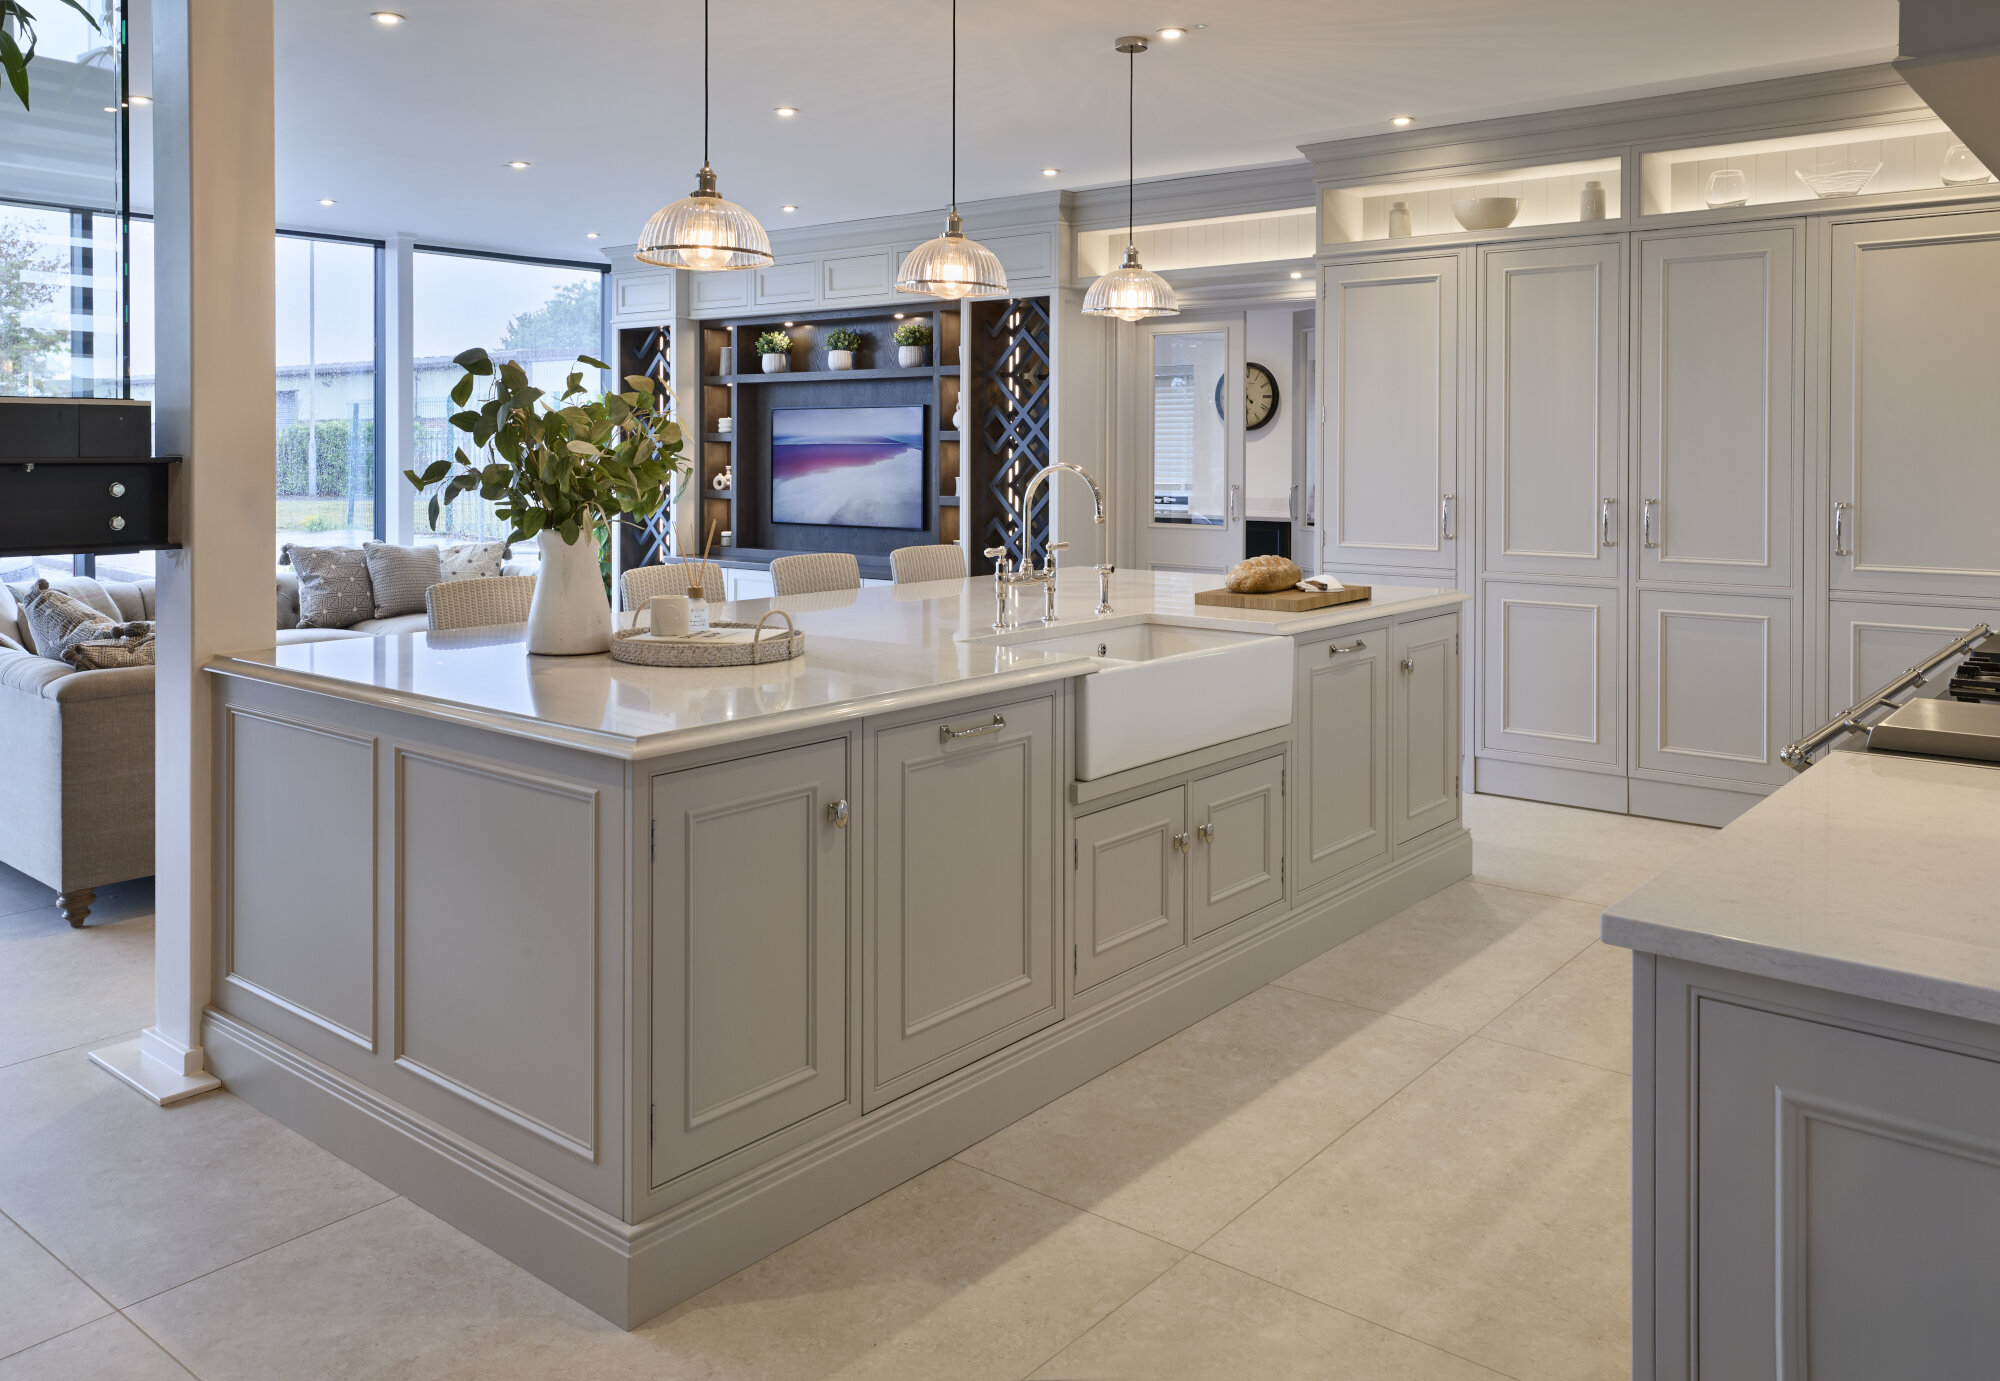 This Bespoke Kitchen Design is on display in our showroom near Skegness